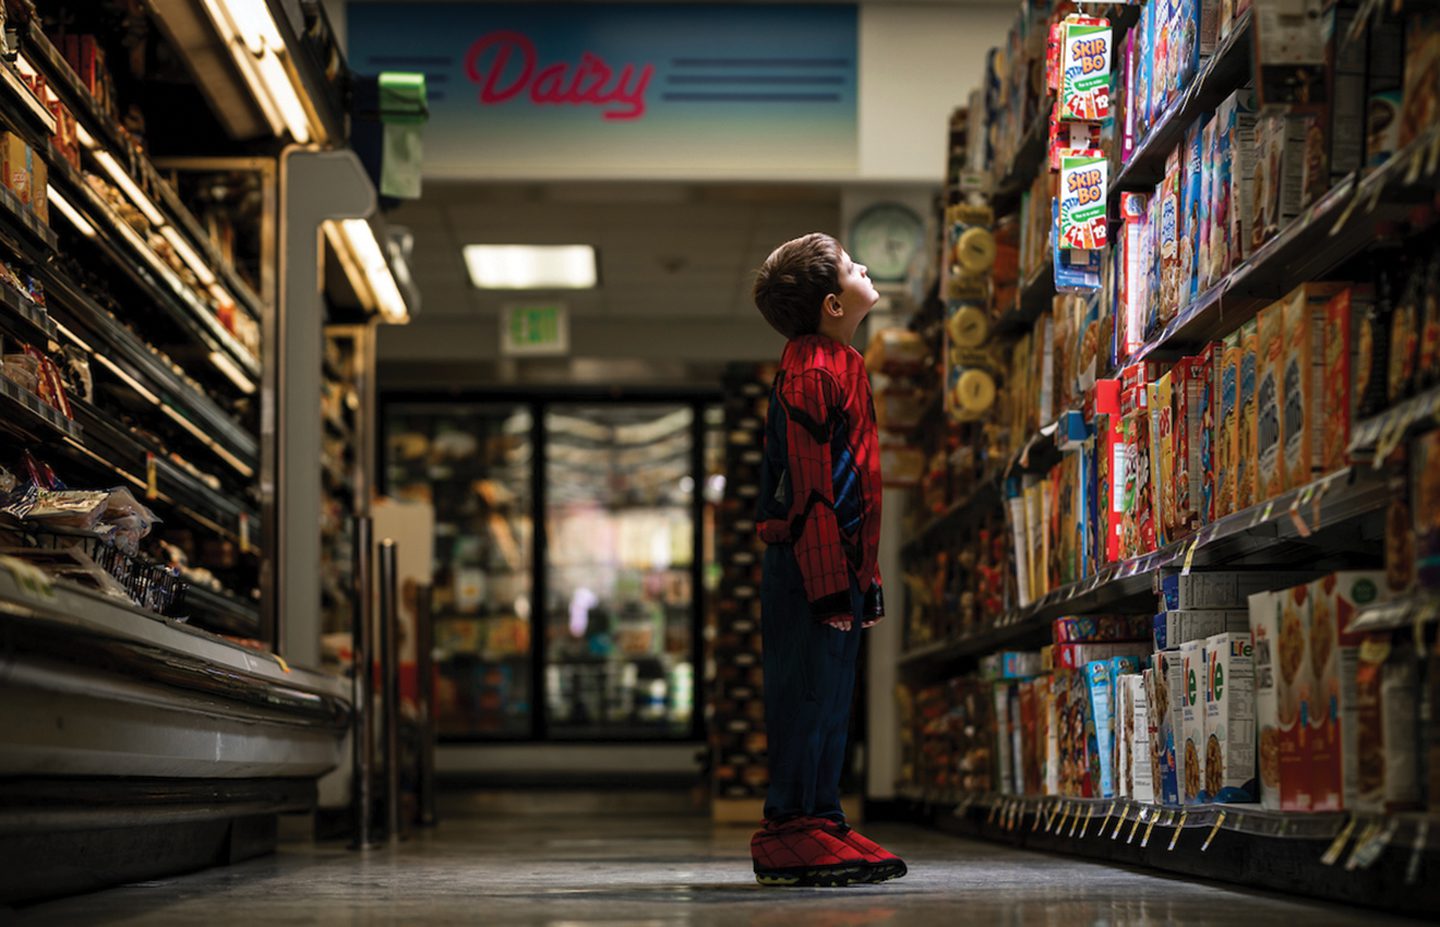 Child in Spiderman costume at the grocery store looking at products in an aisle.